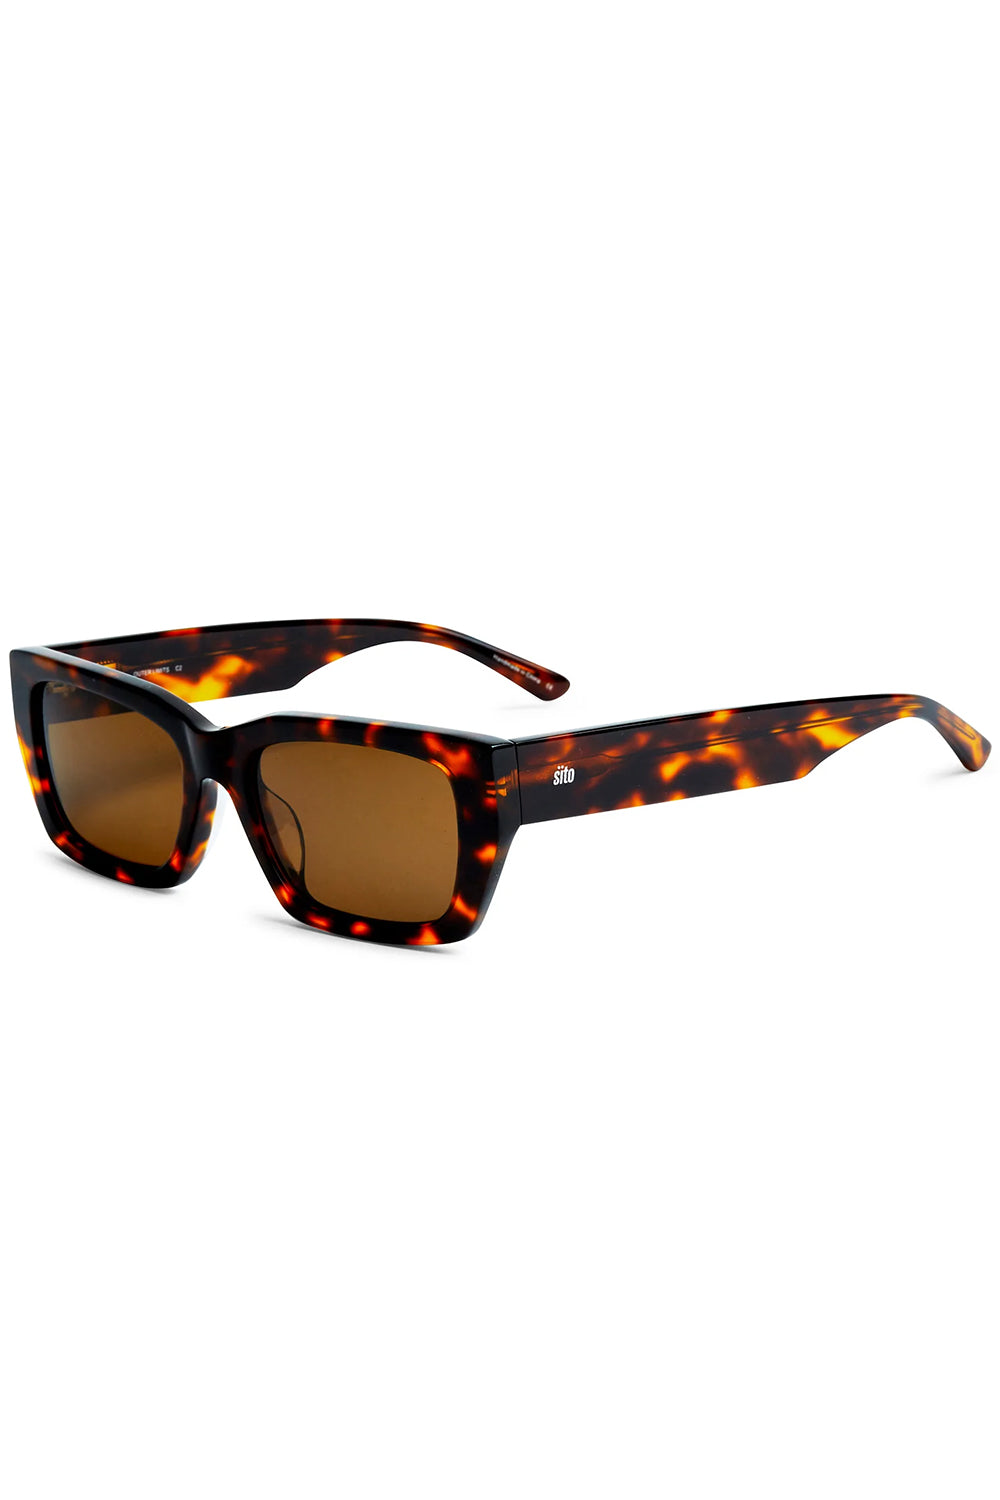 Sito Shades Outer Limits Sunglasses